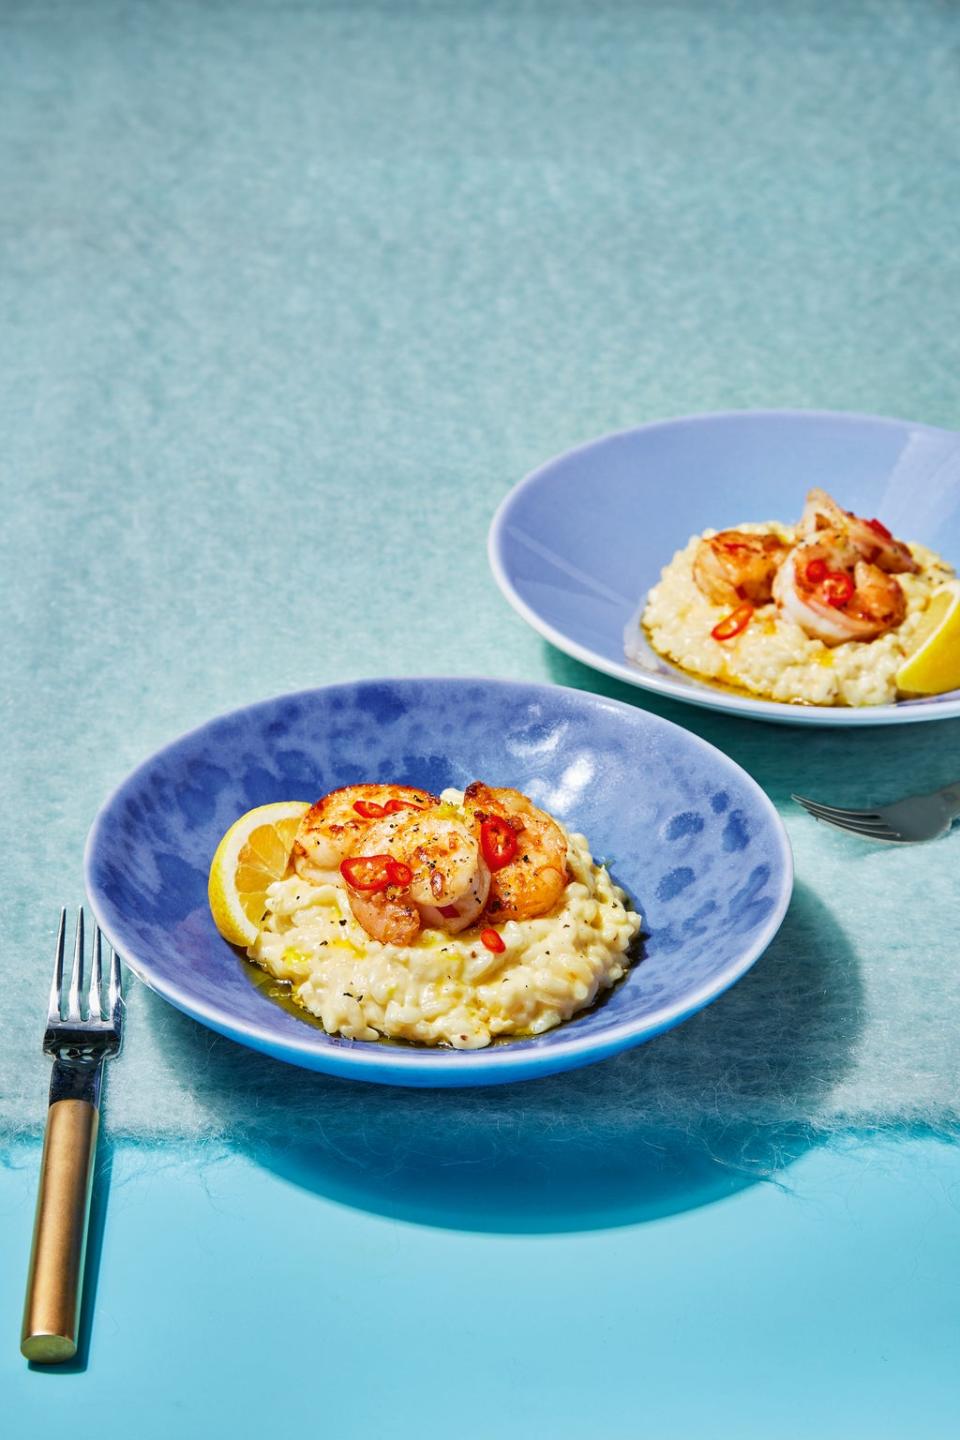 This risotto is so rich in flavour, you don’t need much of it on your plate (PA)